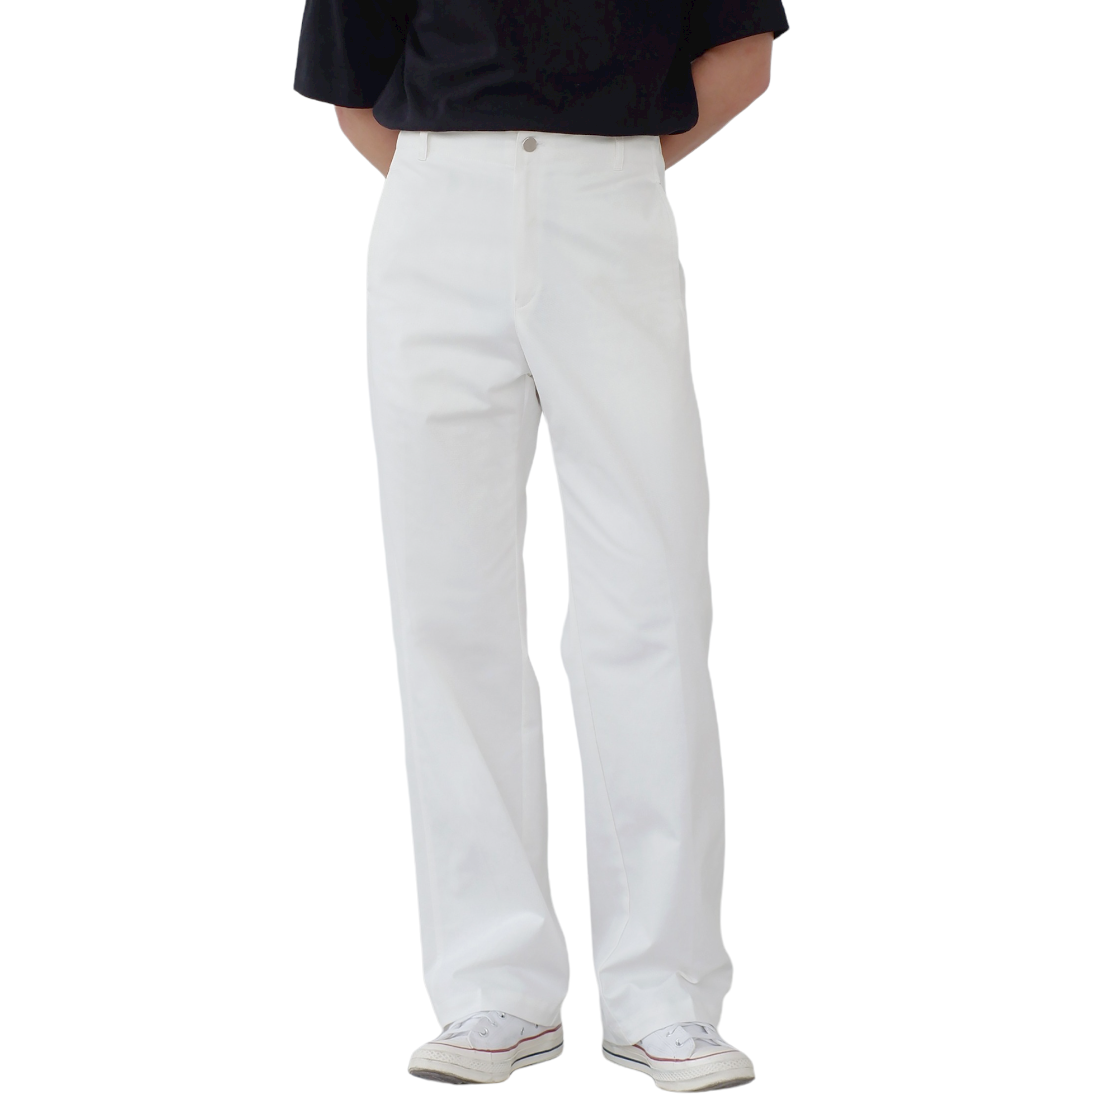 New Wide Pants (White)